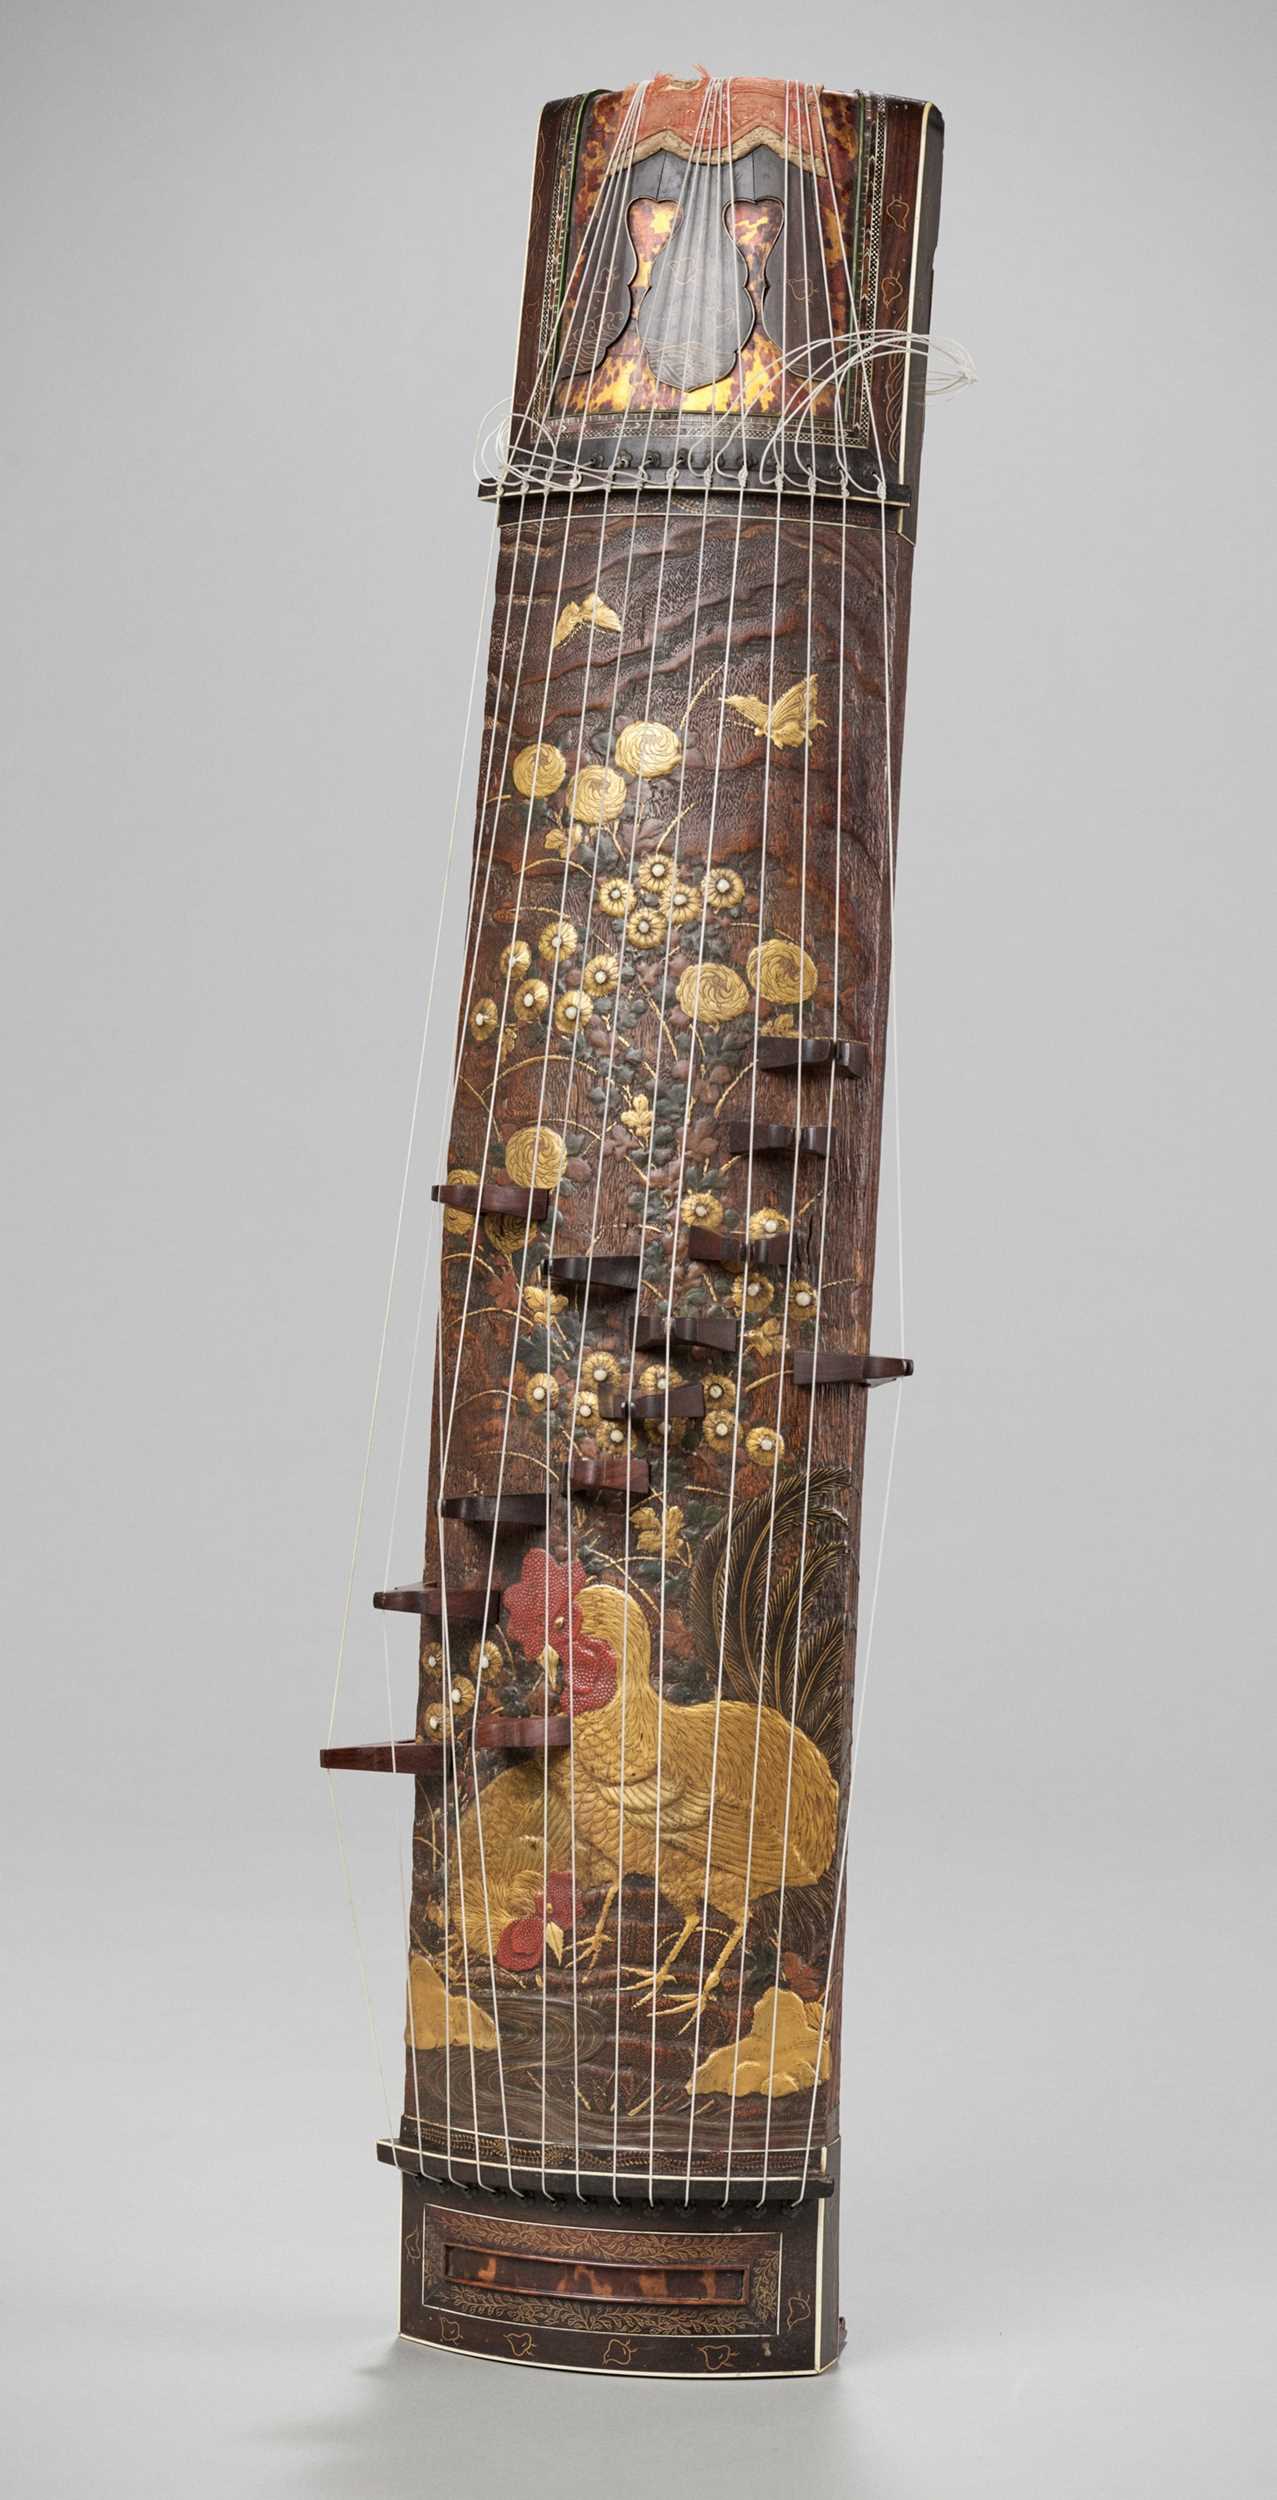 Lot 178 - A RARE LACQUERED PAULOWNIA WOOD KOTO WITH ROOSTERS